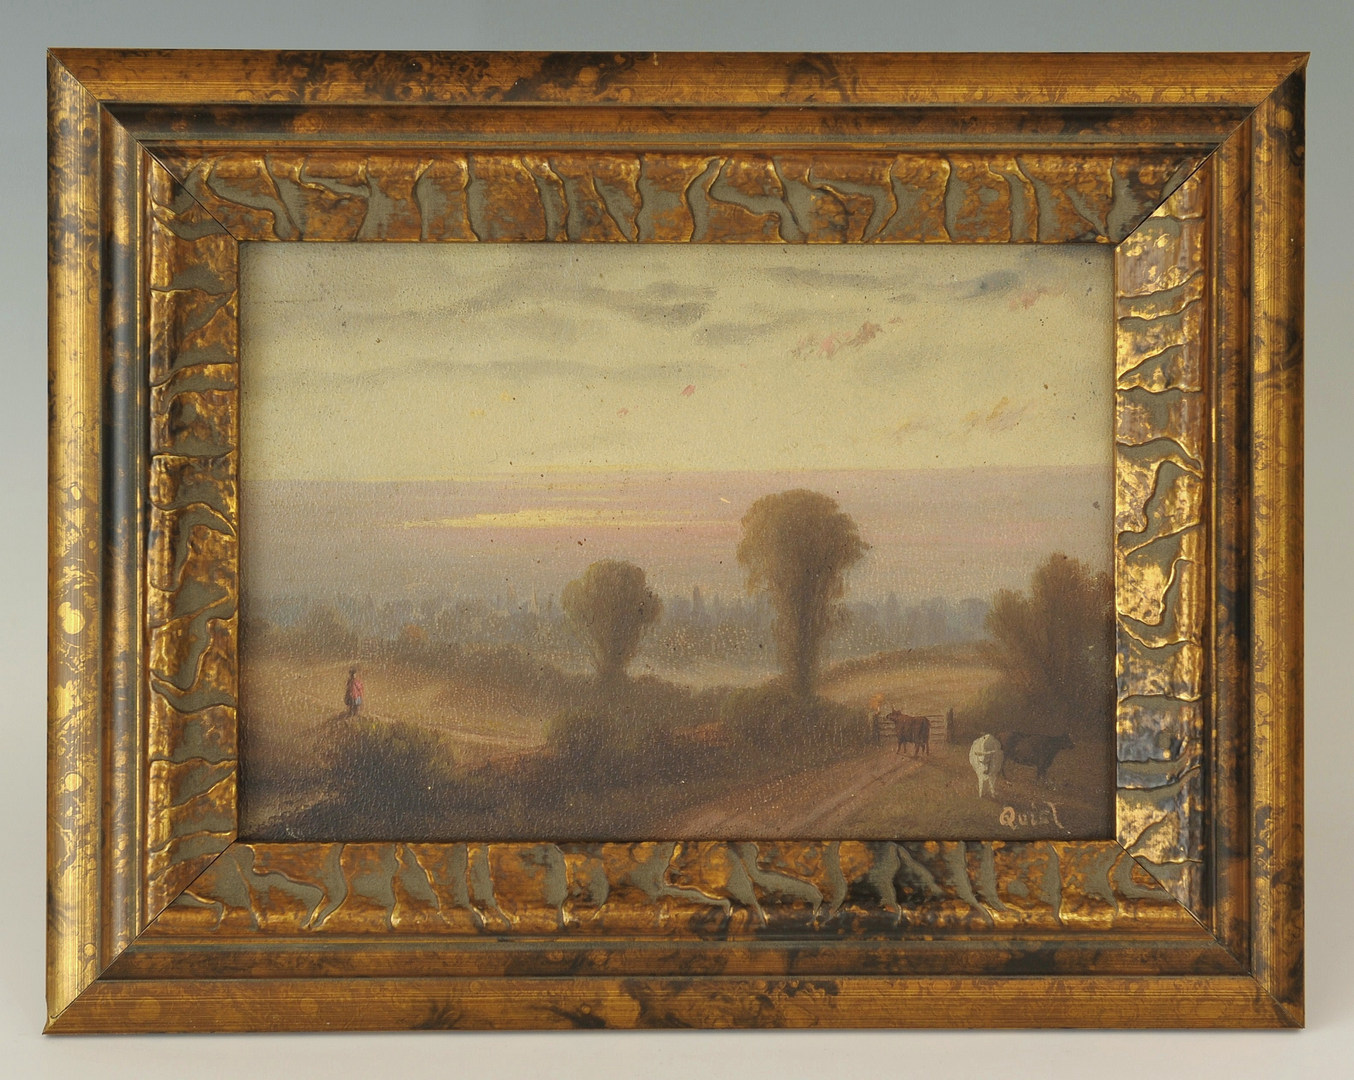 Lot 180: Painting attrib. to Thomas Campbell, signed Quist